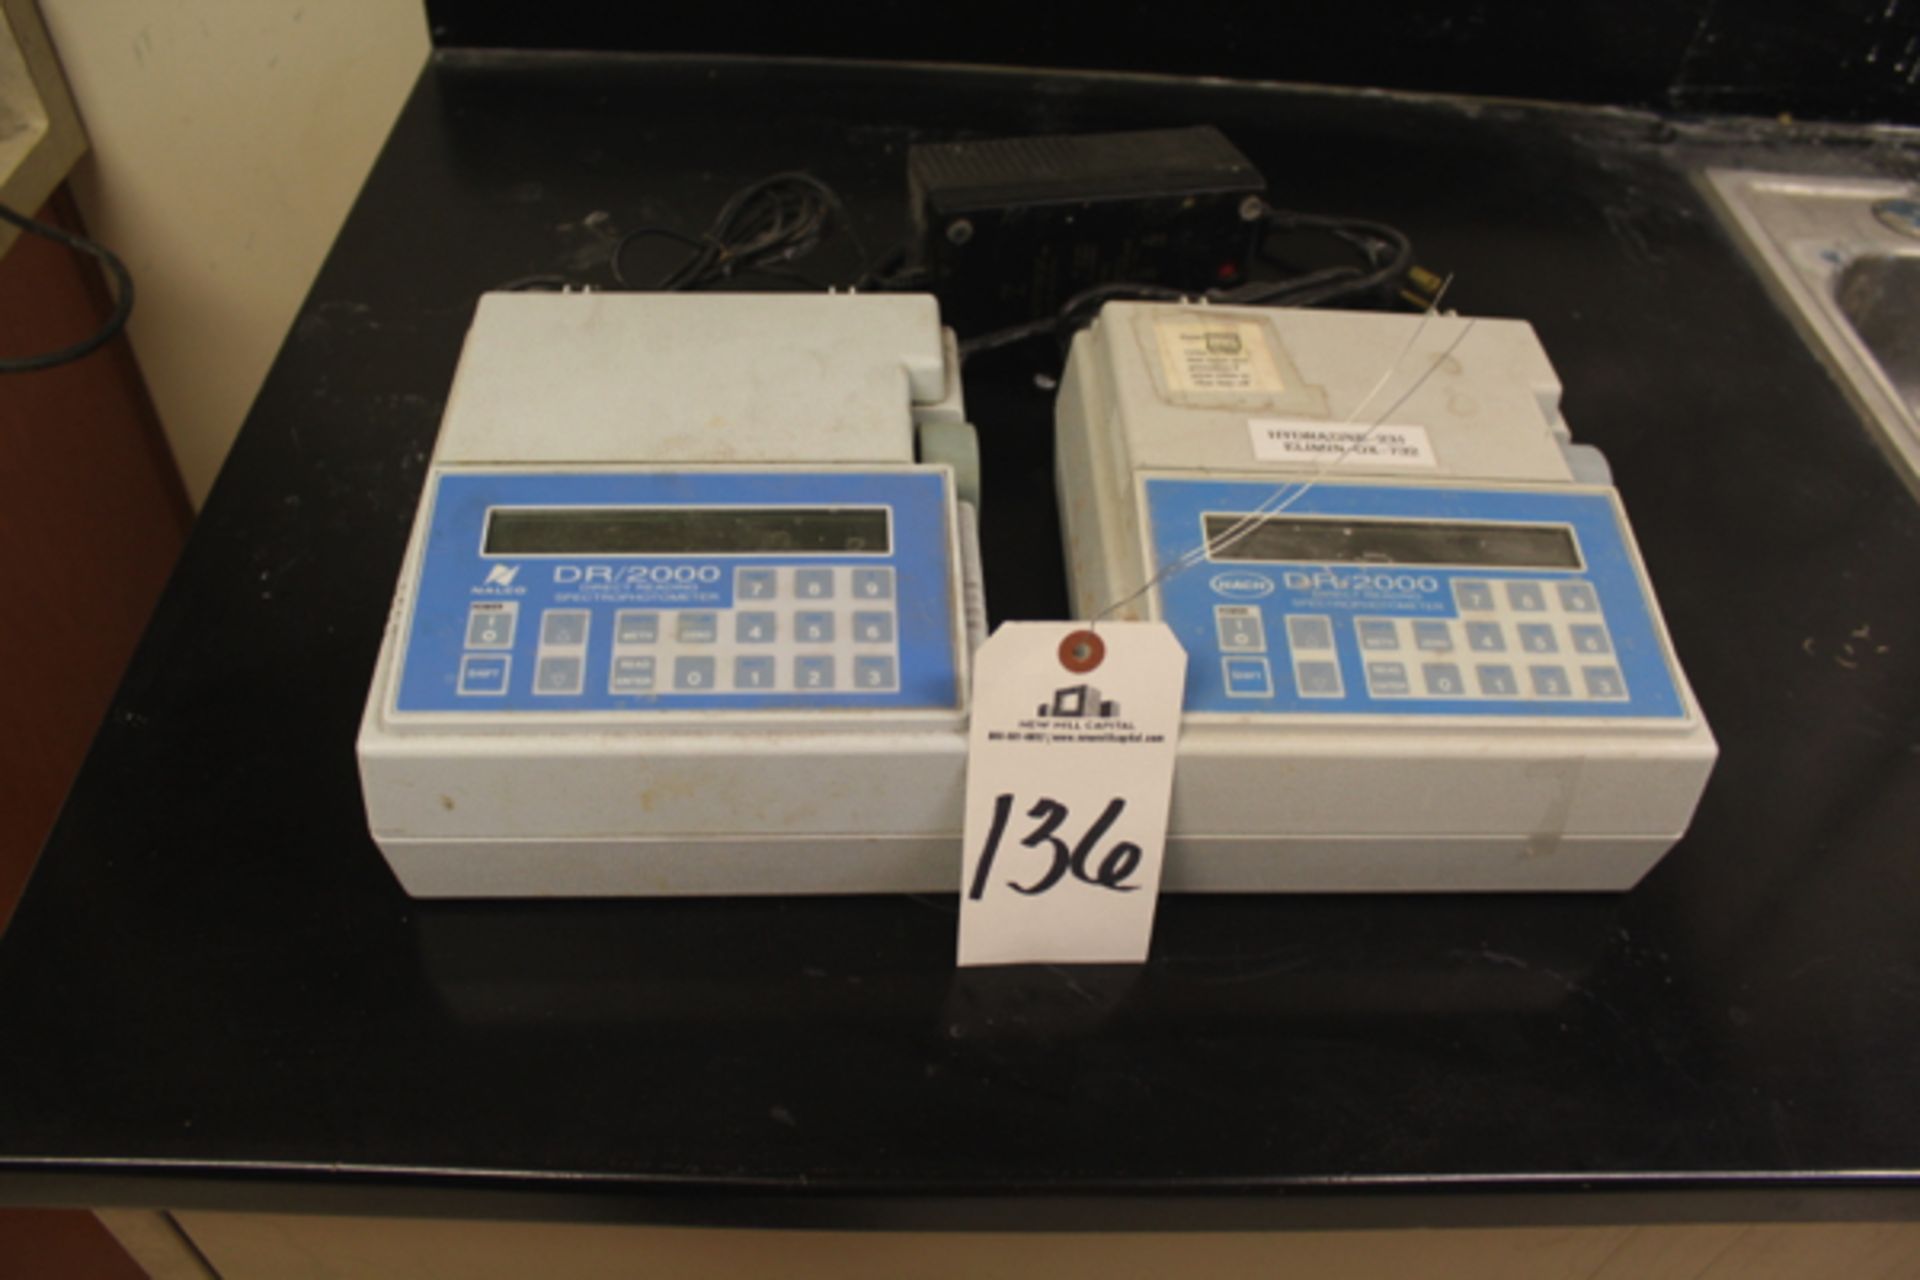 Lot of (2) Hach Spectrophotometers, M# DR/2000 | Location: Turbine Building